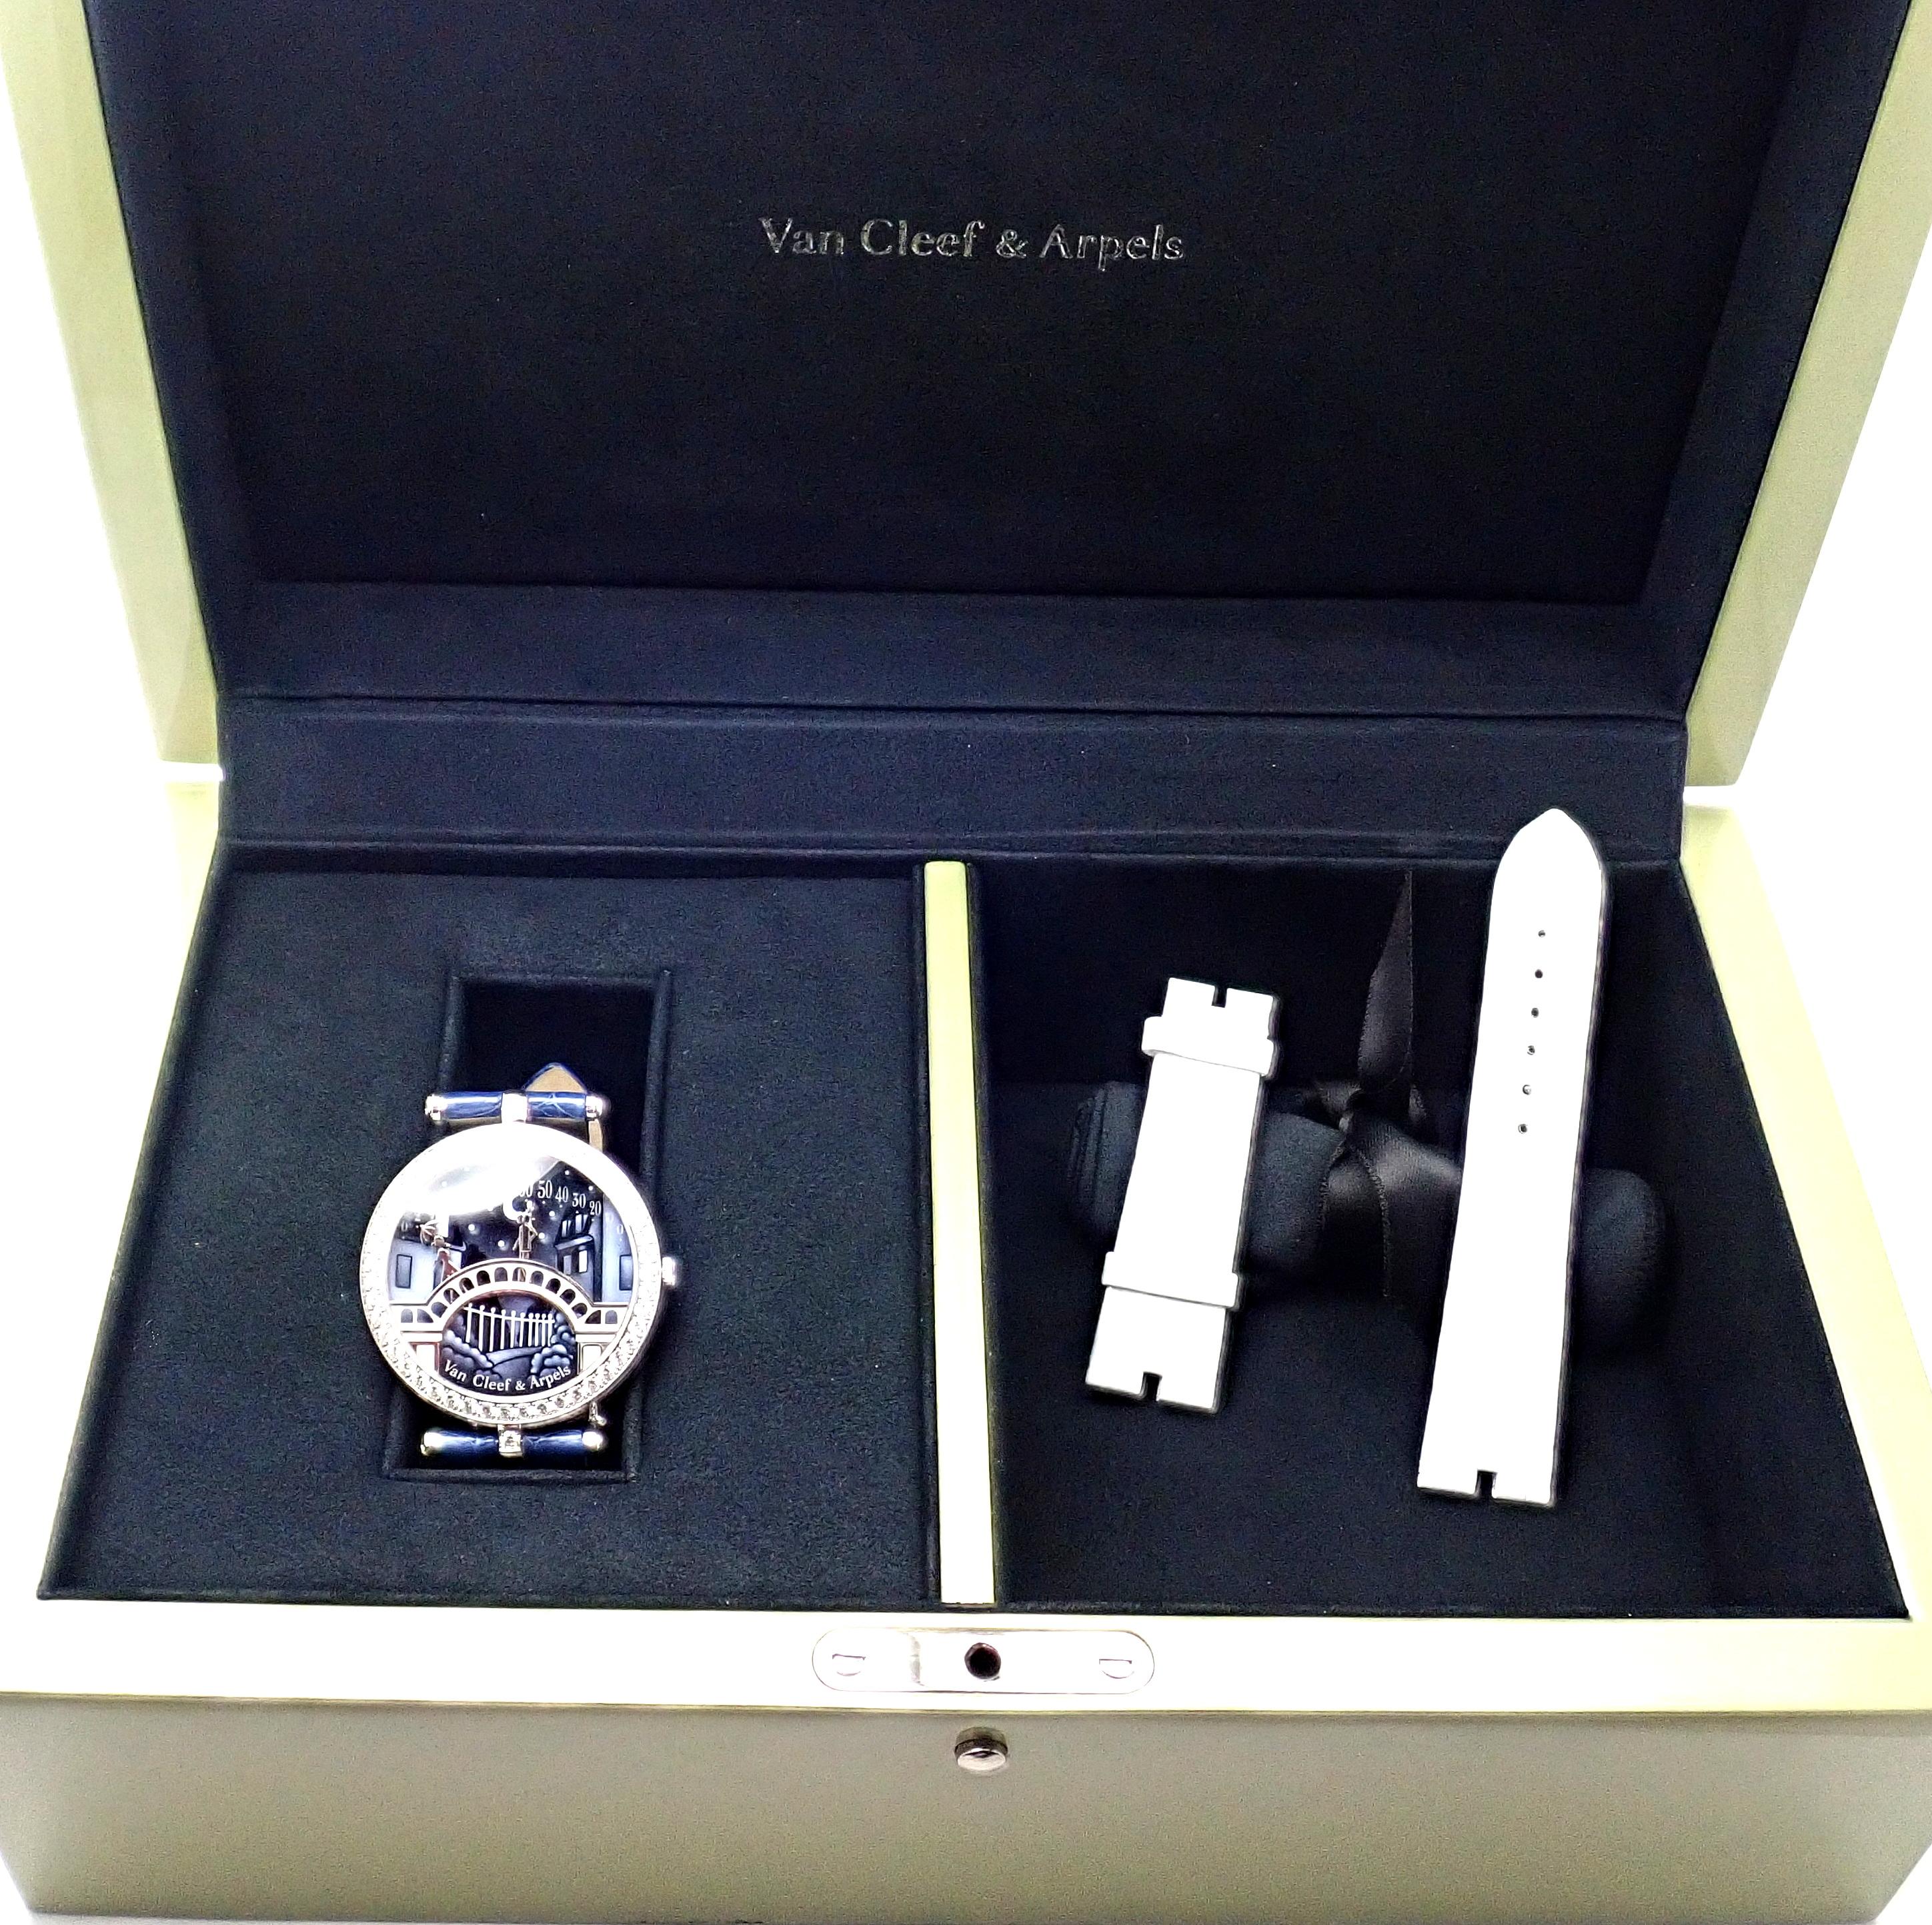 18k White Gold Diamond Limited Edition Pont des Amoureux Wristwatch by Van Cleef & Arpels. 
This watch comes with VCA box and certificate of authenticity.
This is a limited edition watch Number 1317. 
With 122 Round brilliant cut diamonds VVS1